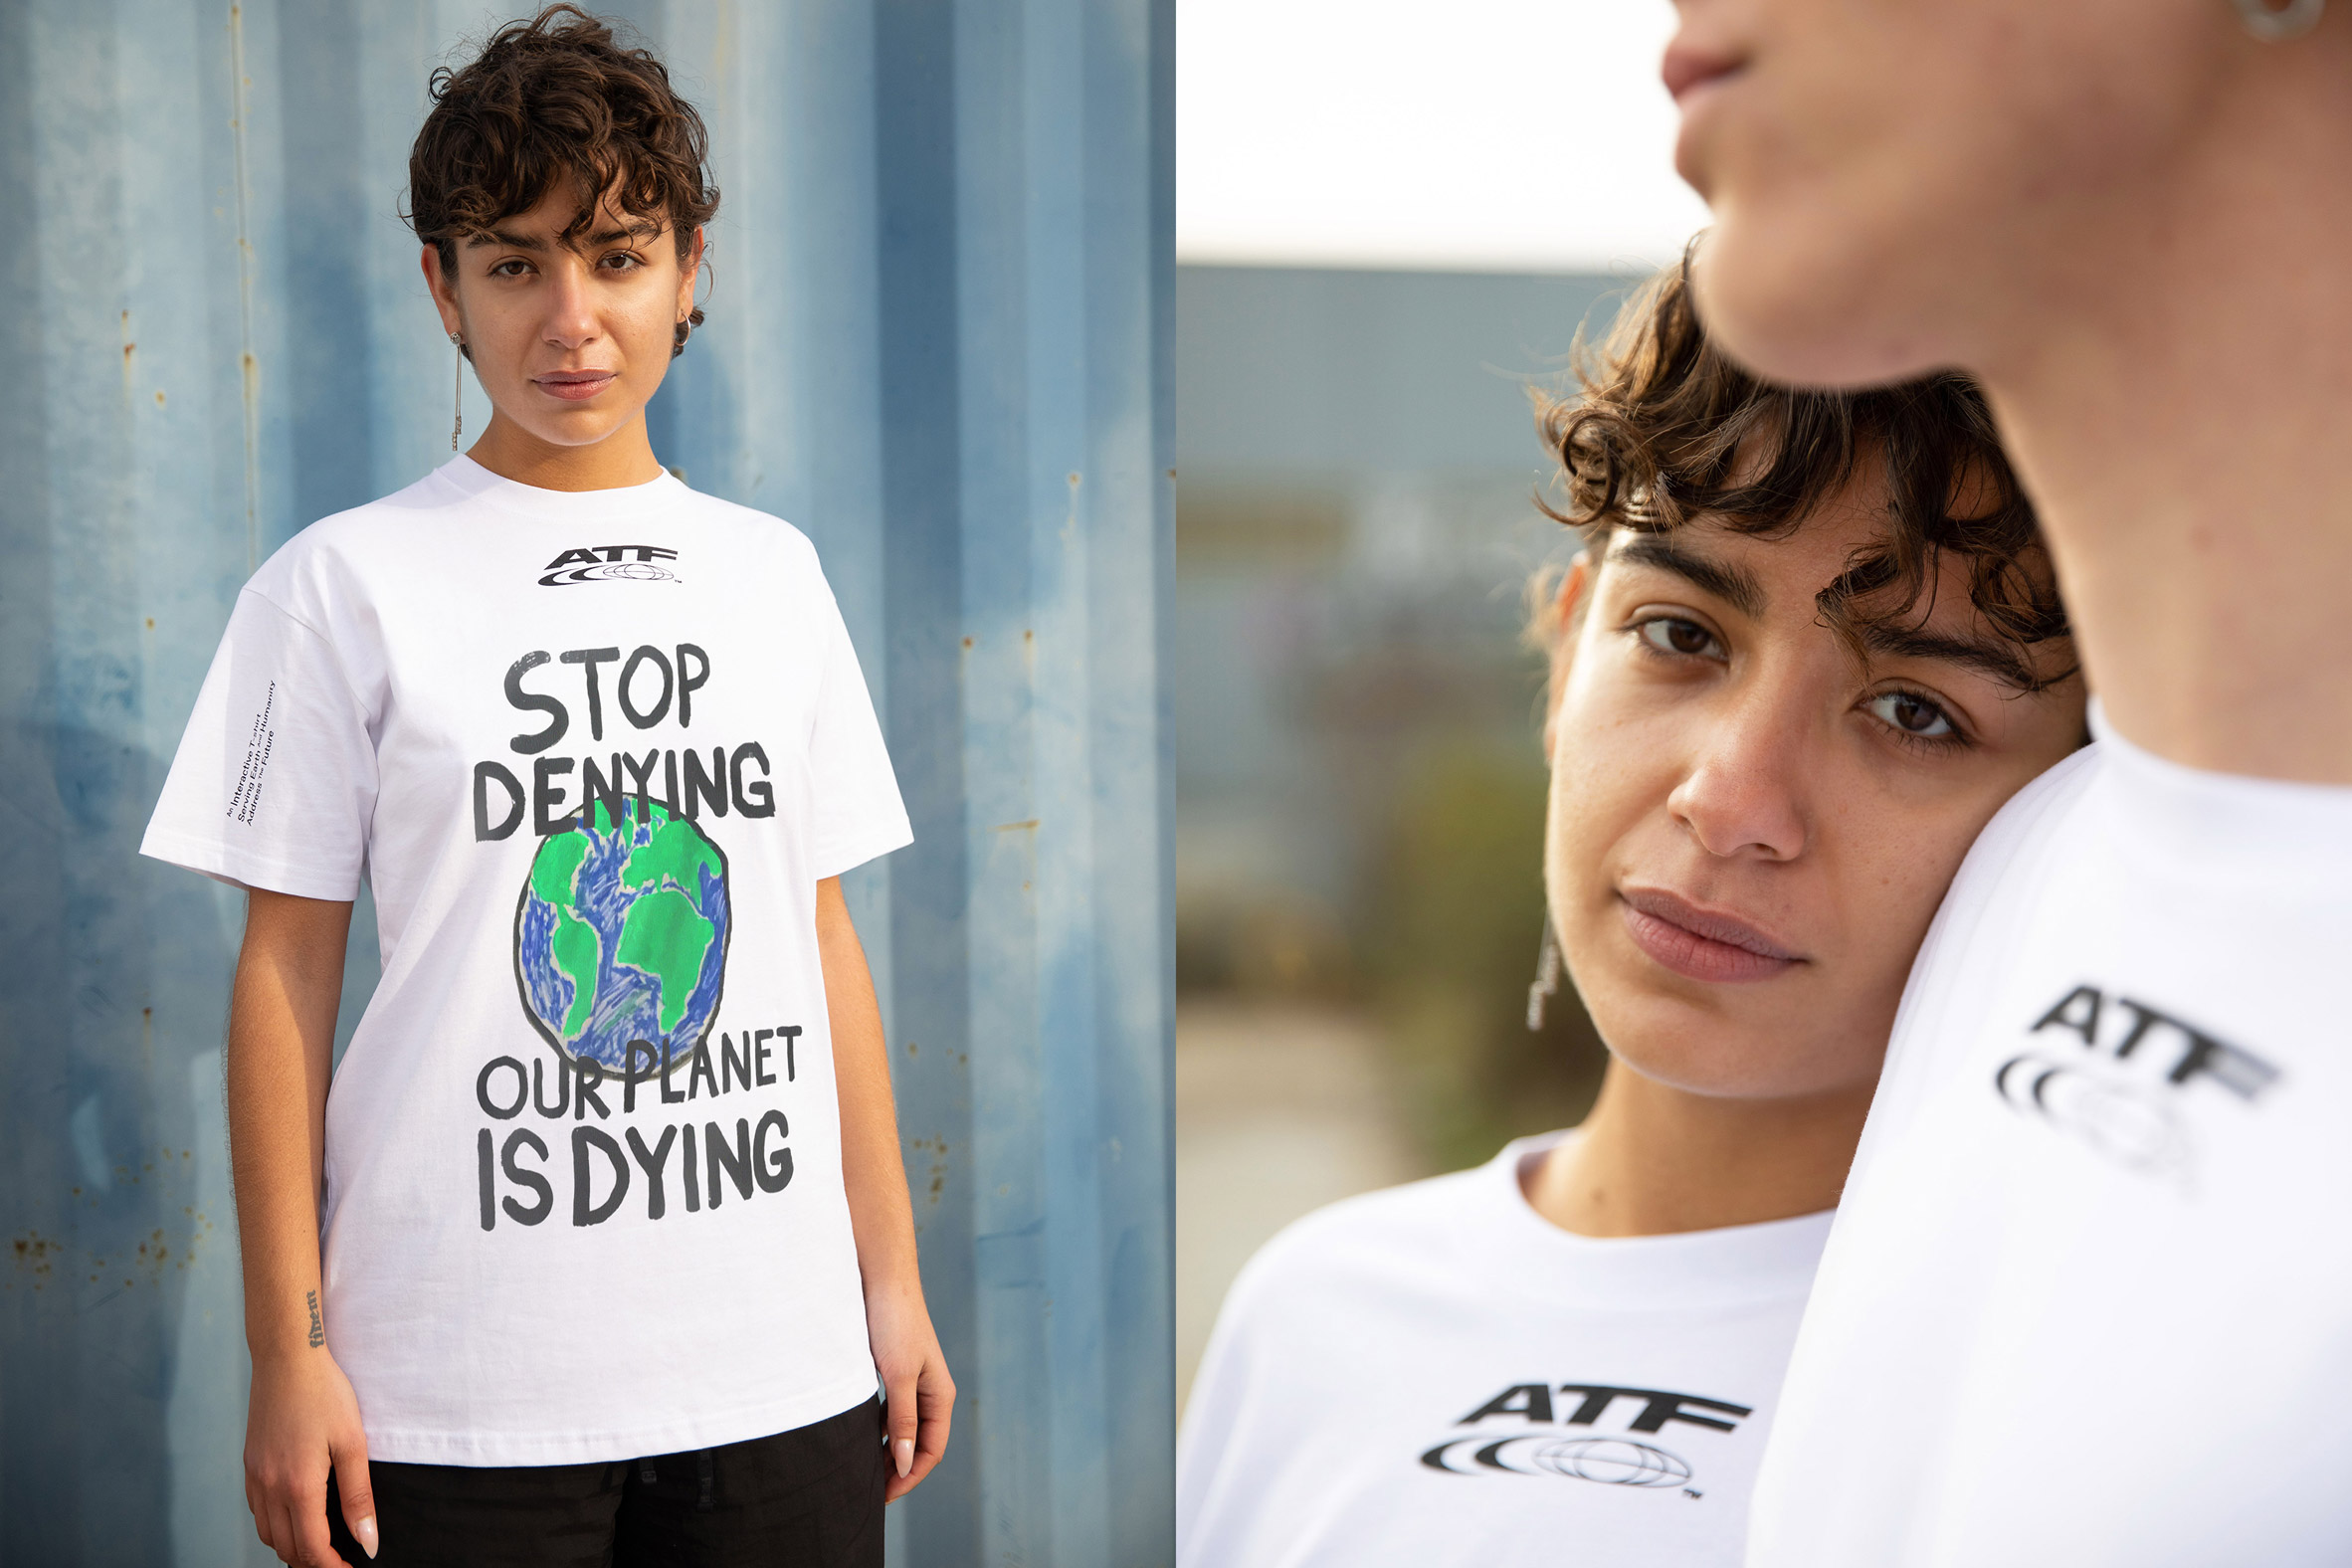 Carlings releases "The Last Statement T-shirt" with slogans in AR